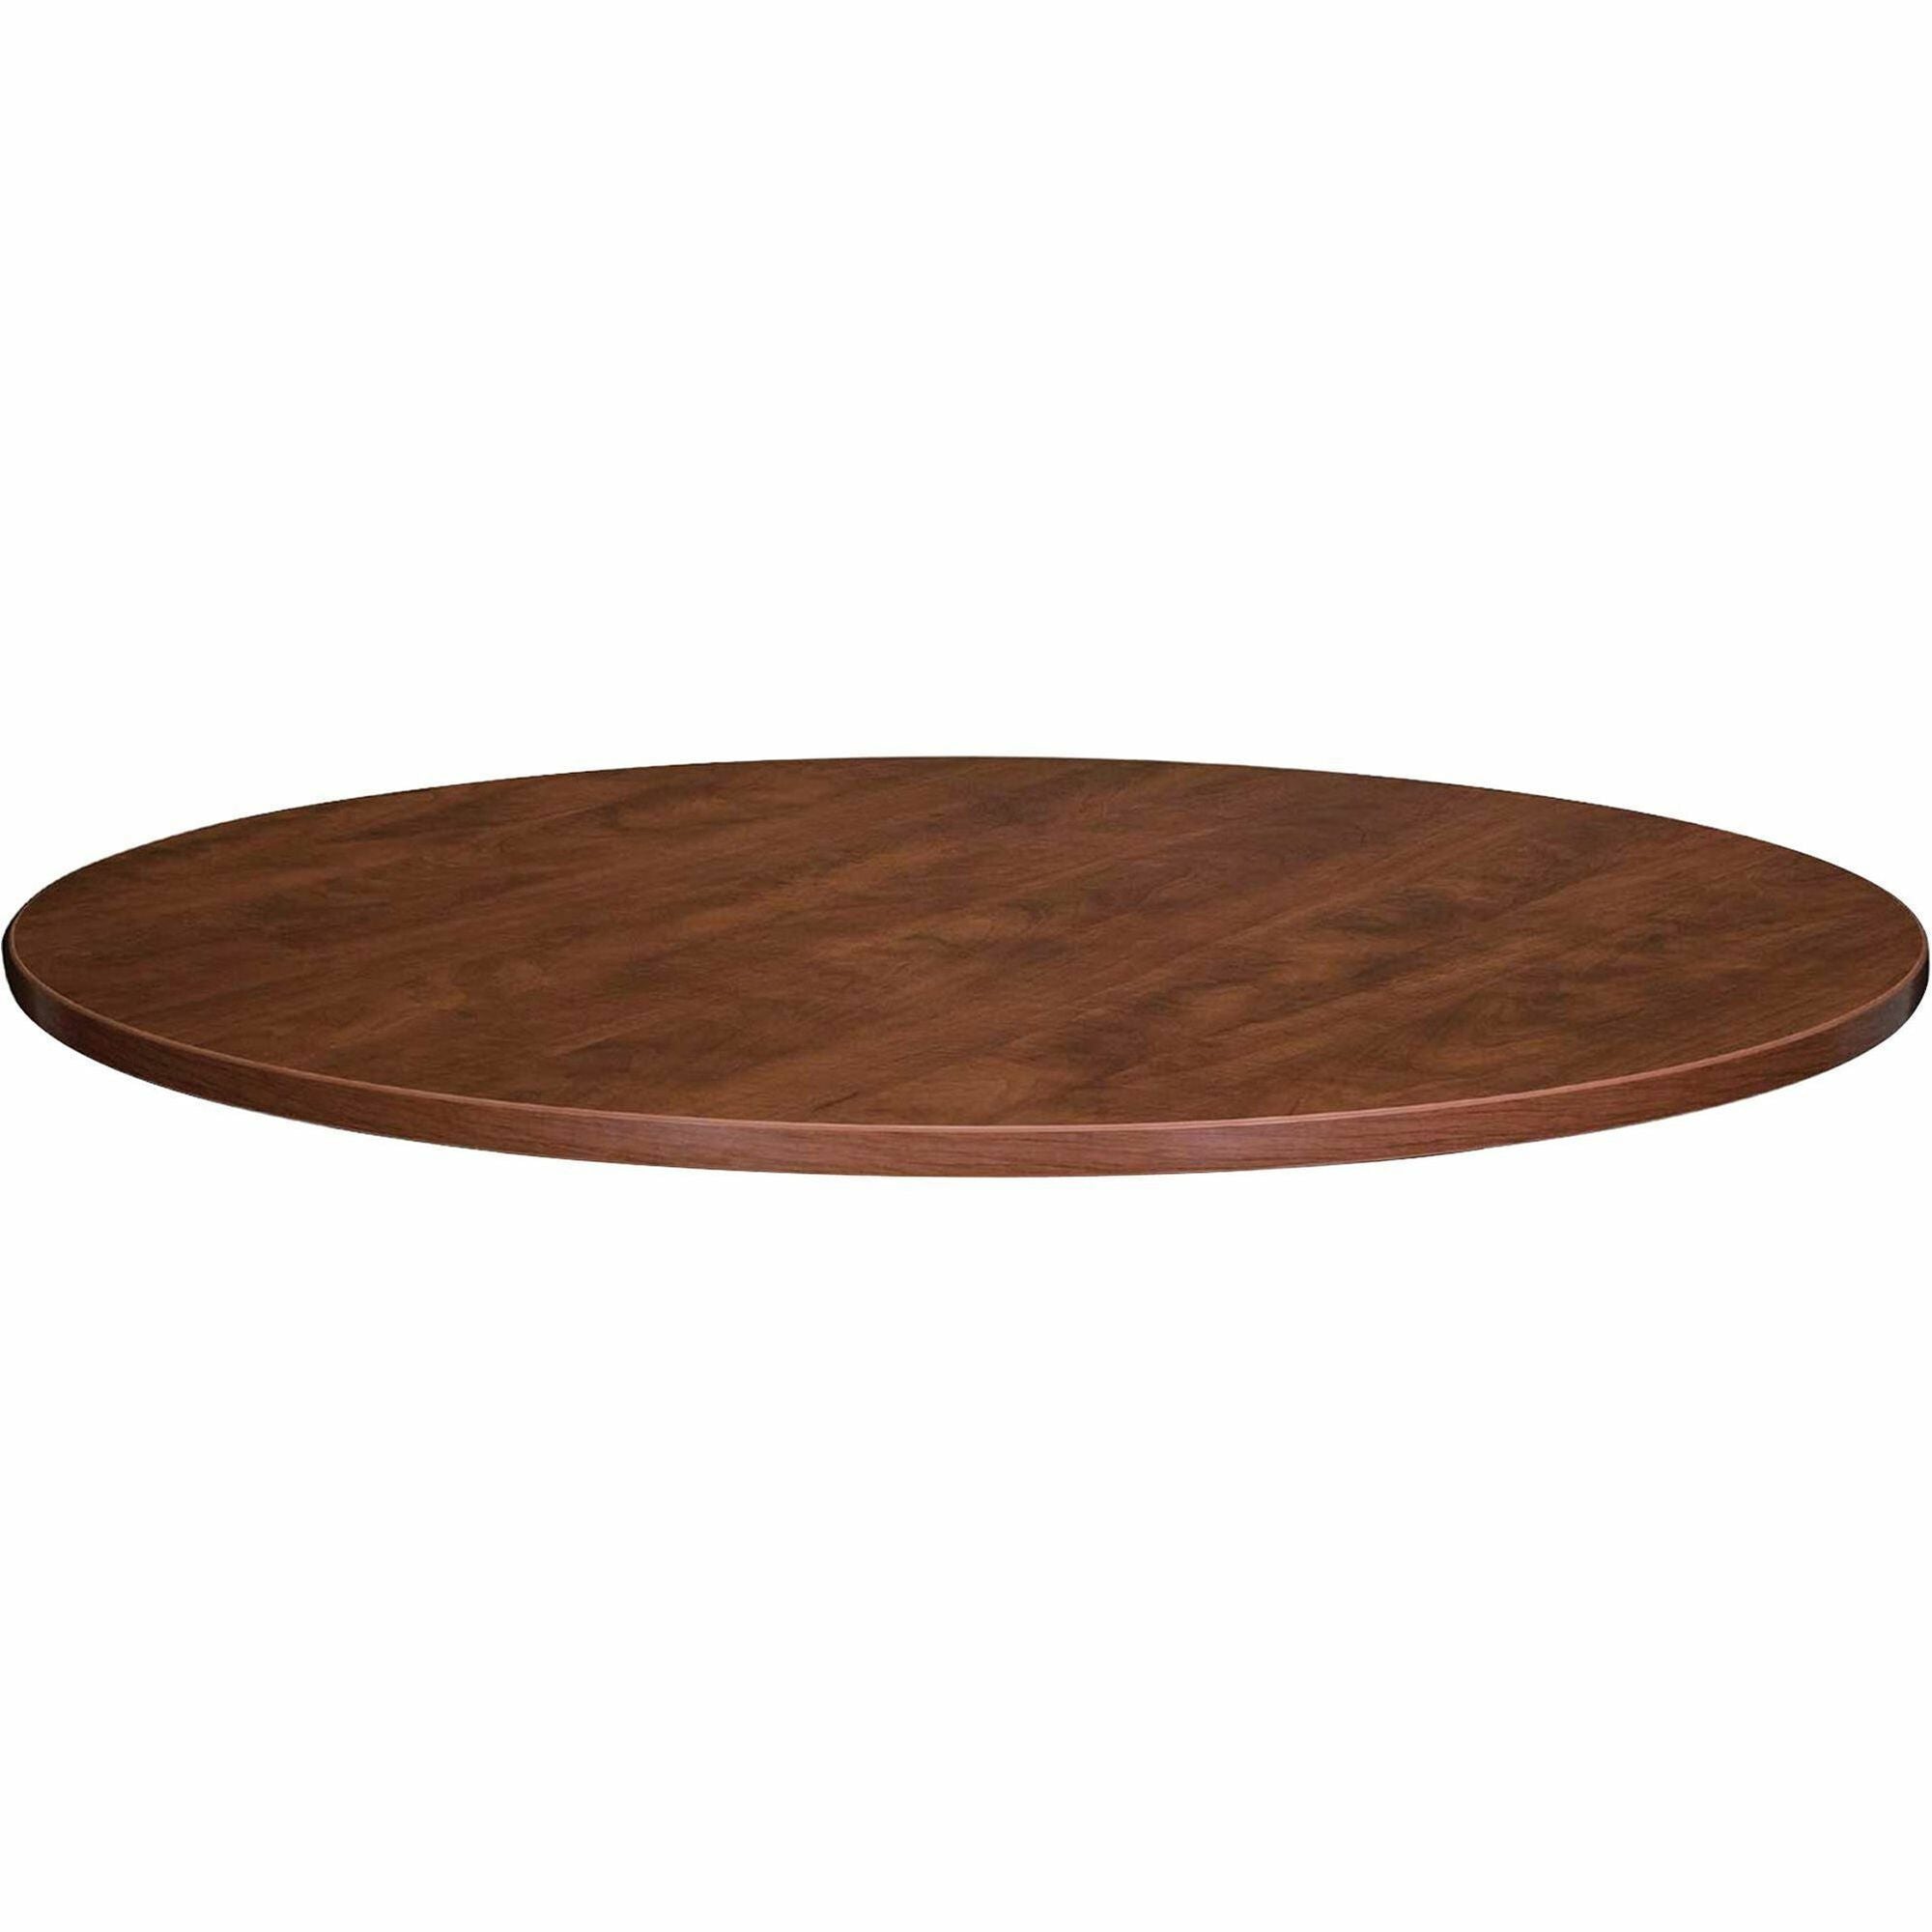 Lorell Essentials Conference Tabletop - For - Table TopCherry Round Top x 47.25" Table Top Width x 47.25" Table Top Depth x 1.25" Table Top Thickness x 48" Table Top Diameter - 1" Height - Cherry, Laminated - 1 Each - 